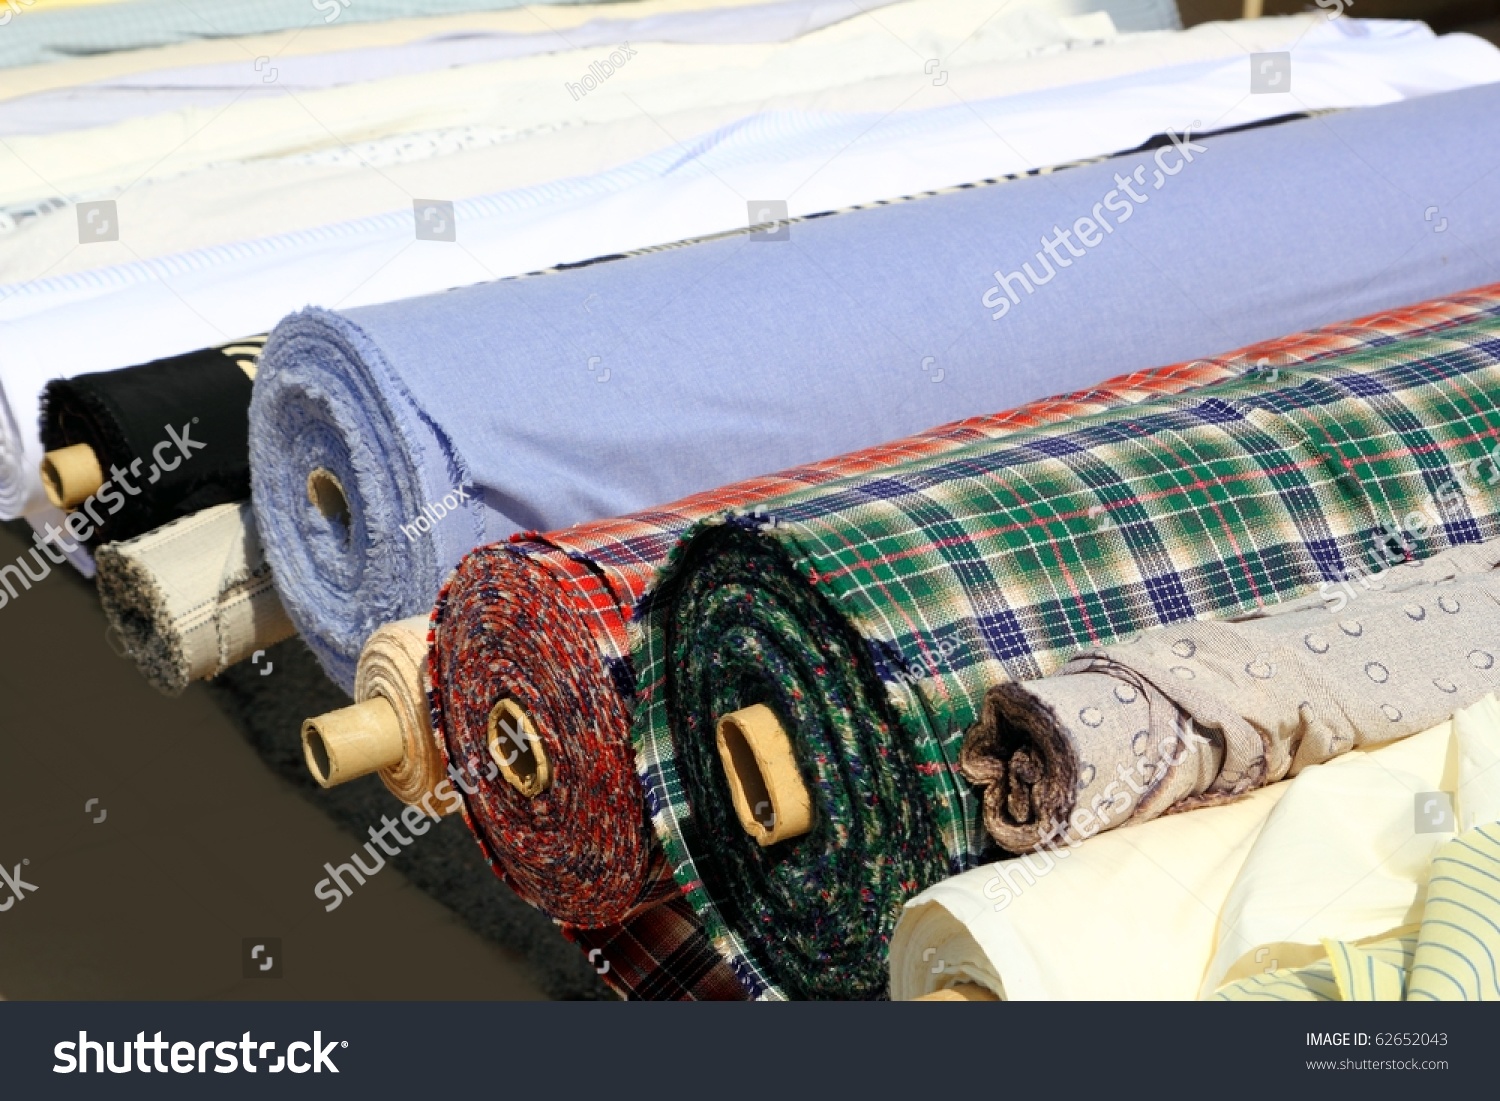 powerpoint-template-fabric-textile-industry-colorful-njnmjhlk